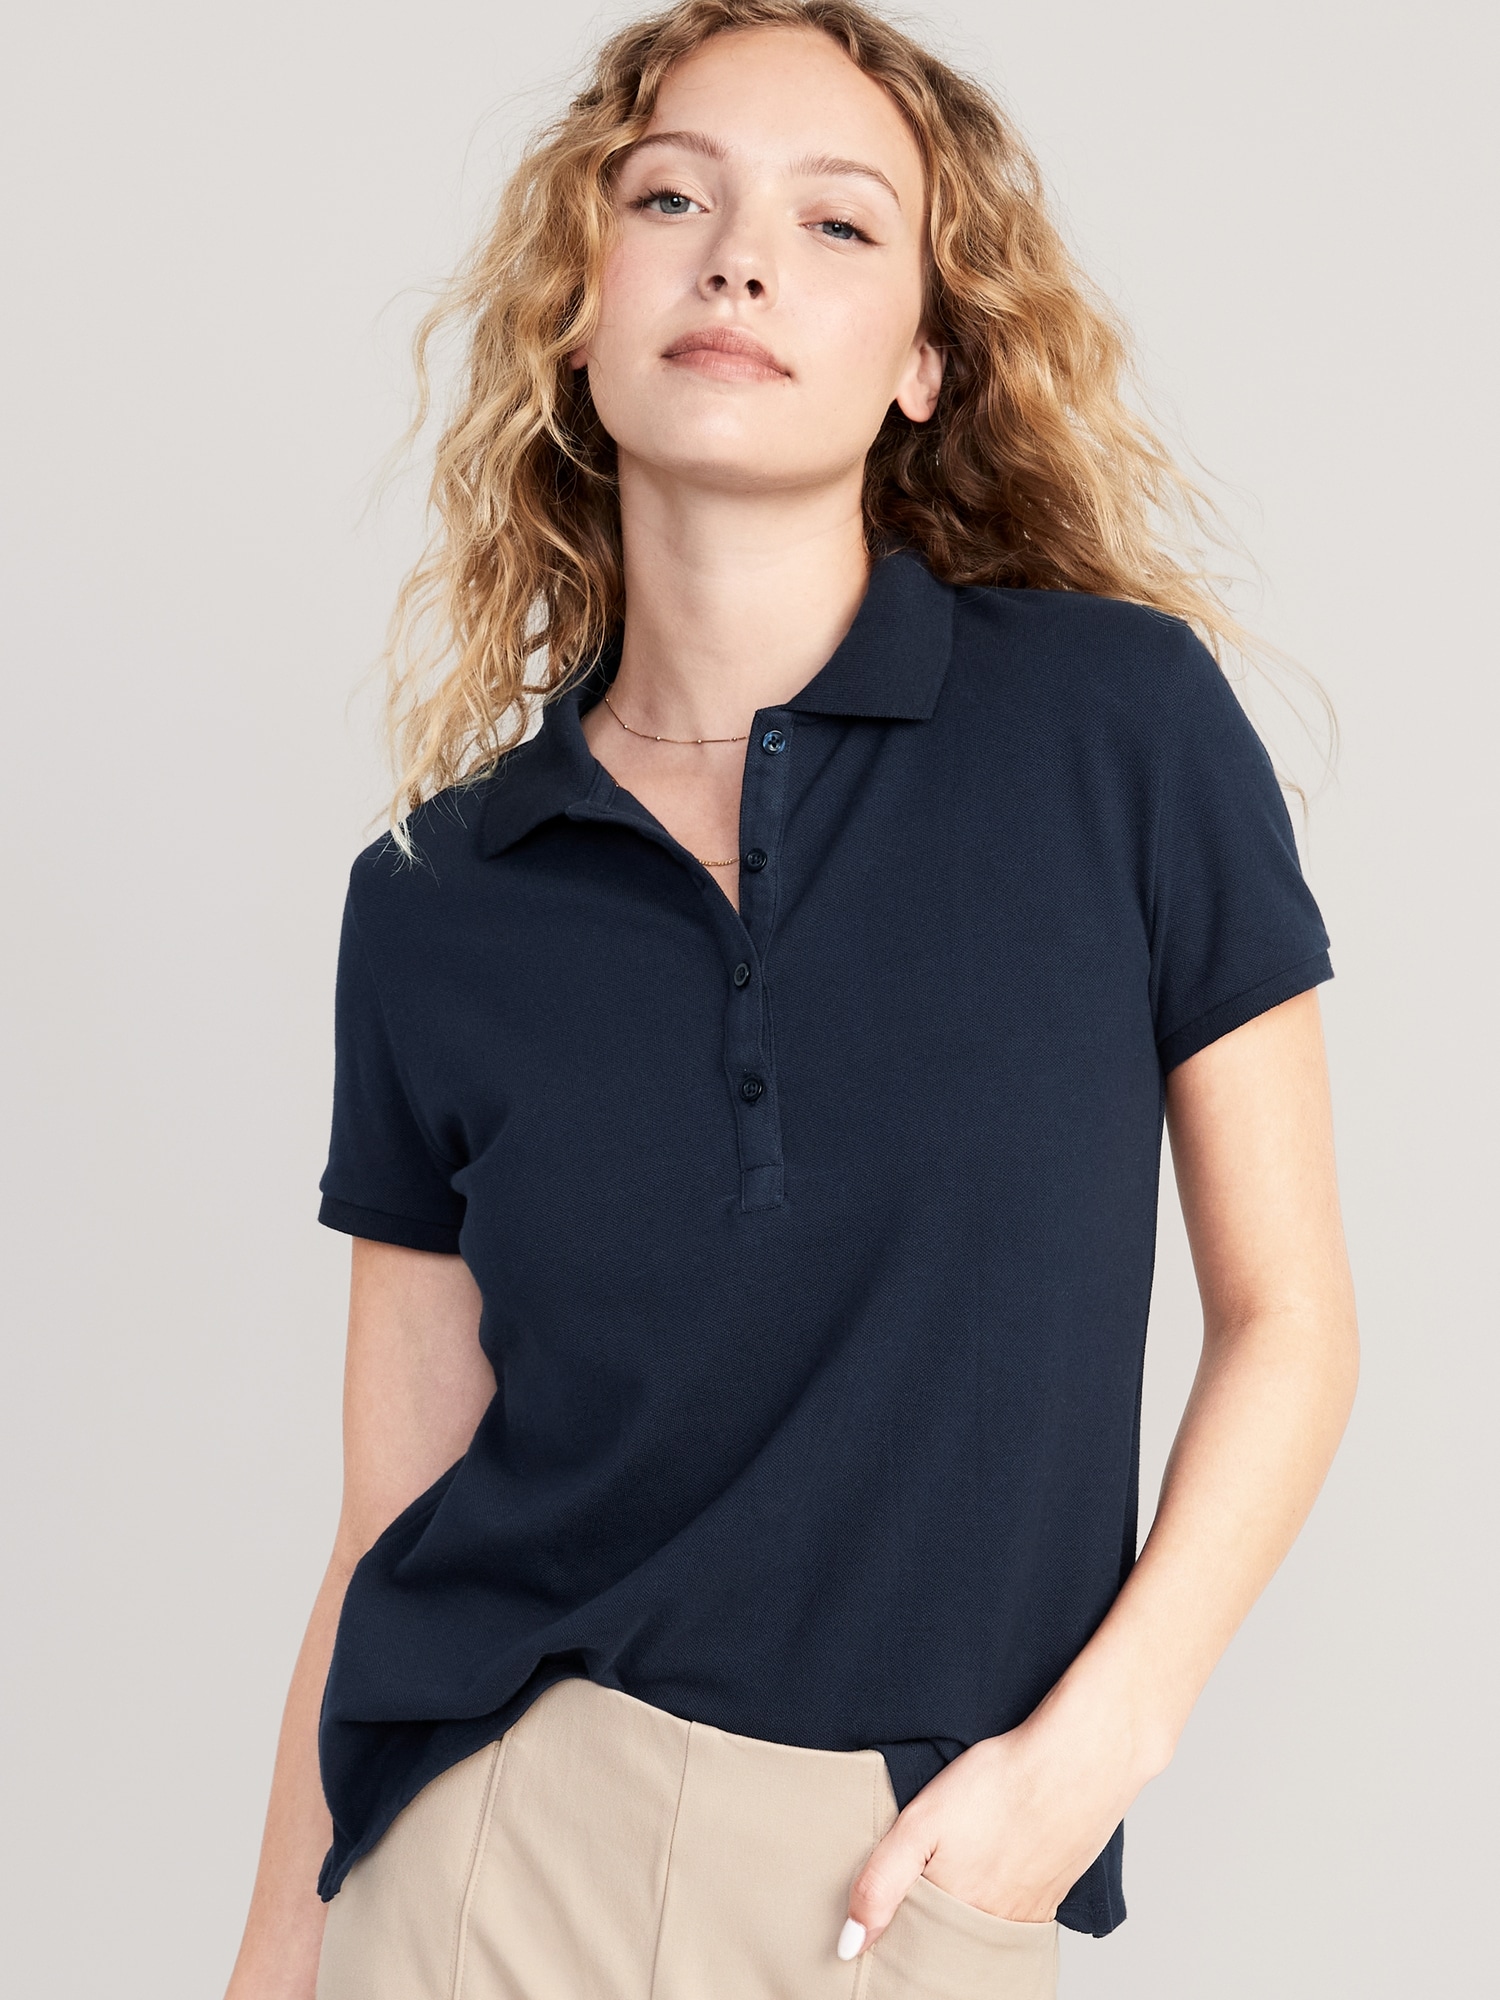 Women\'s Athletic Polo Shirts | Old Navy